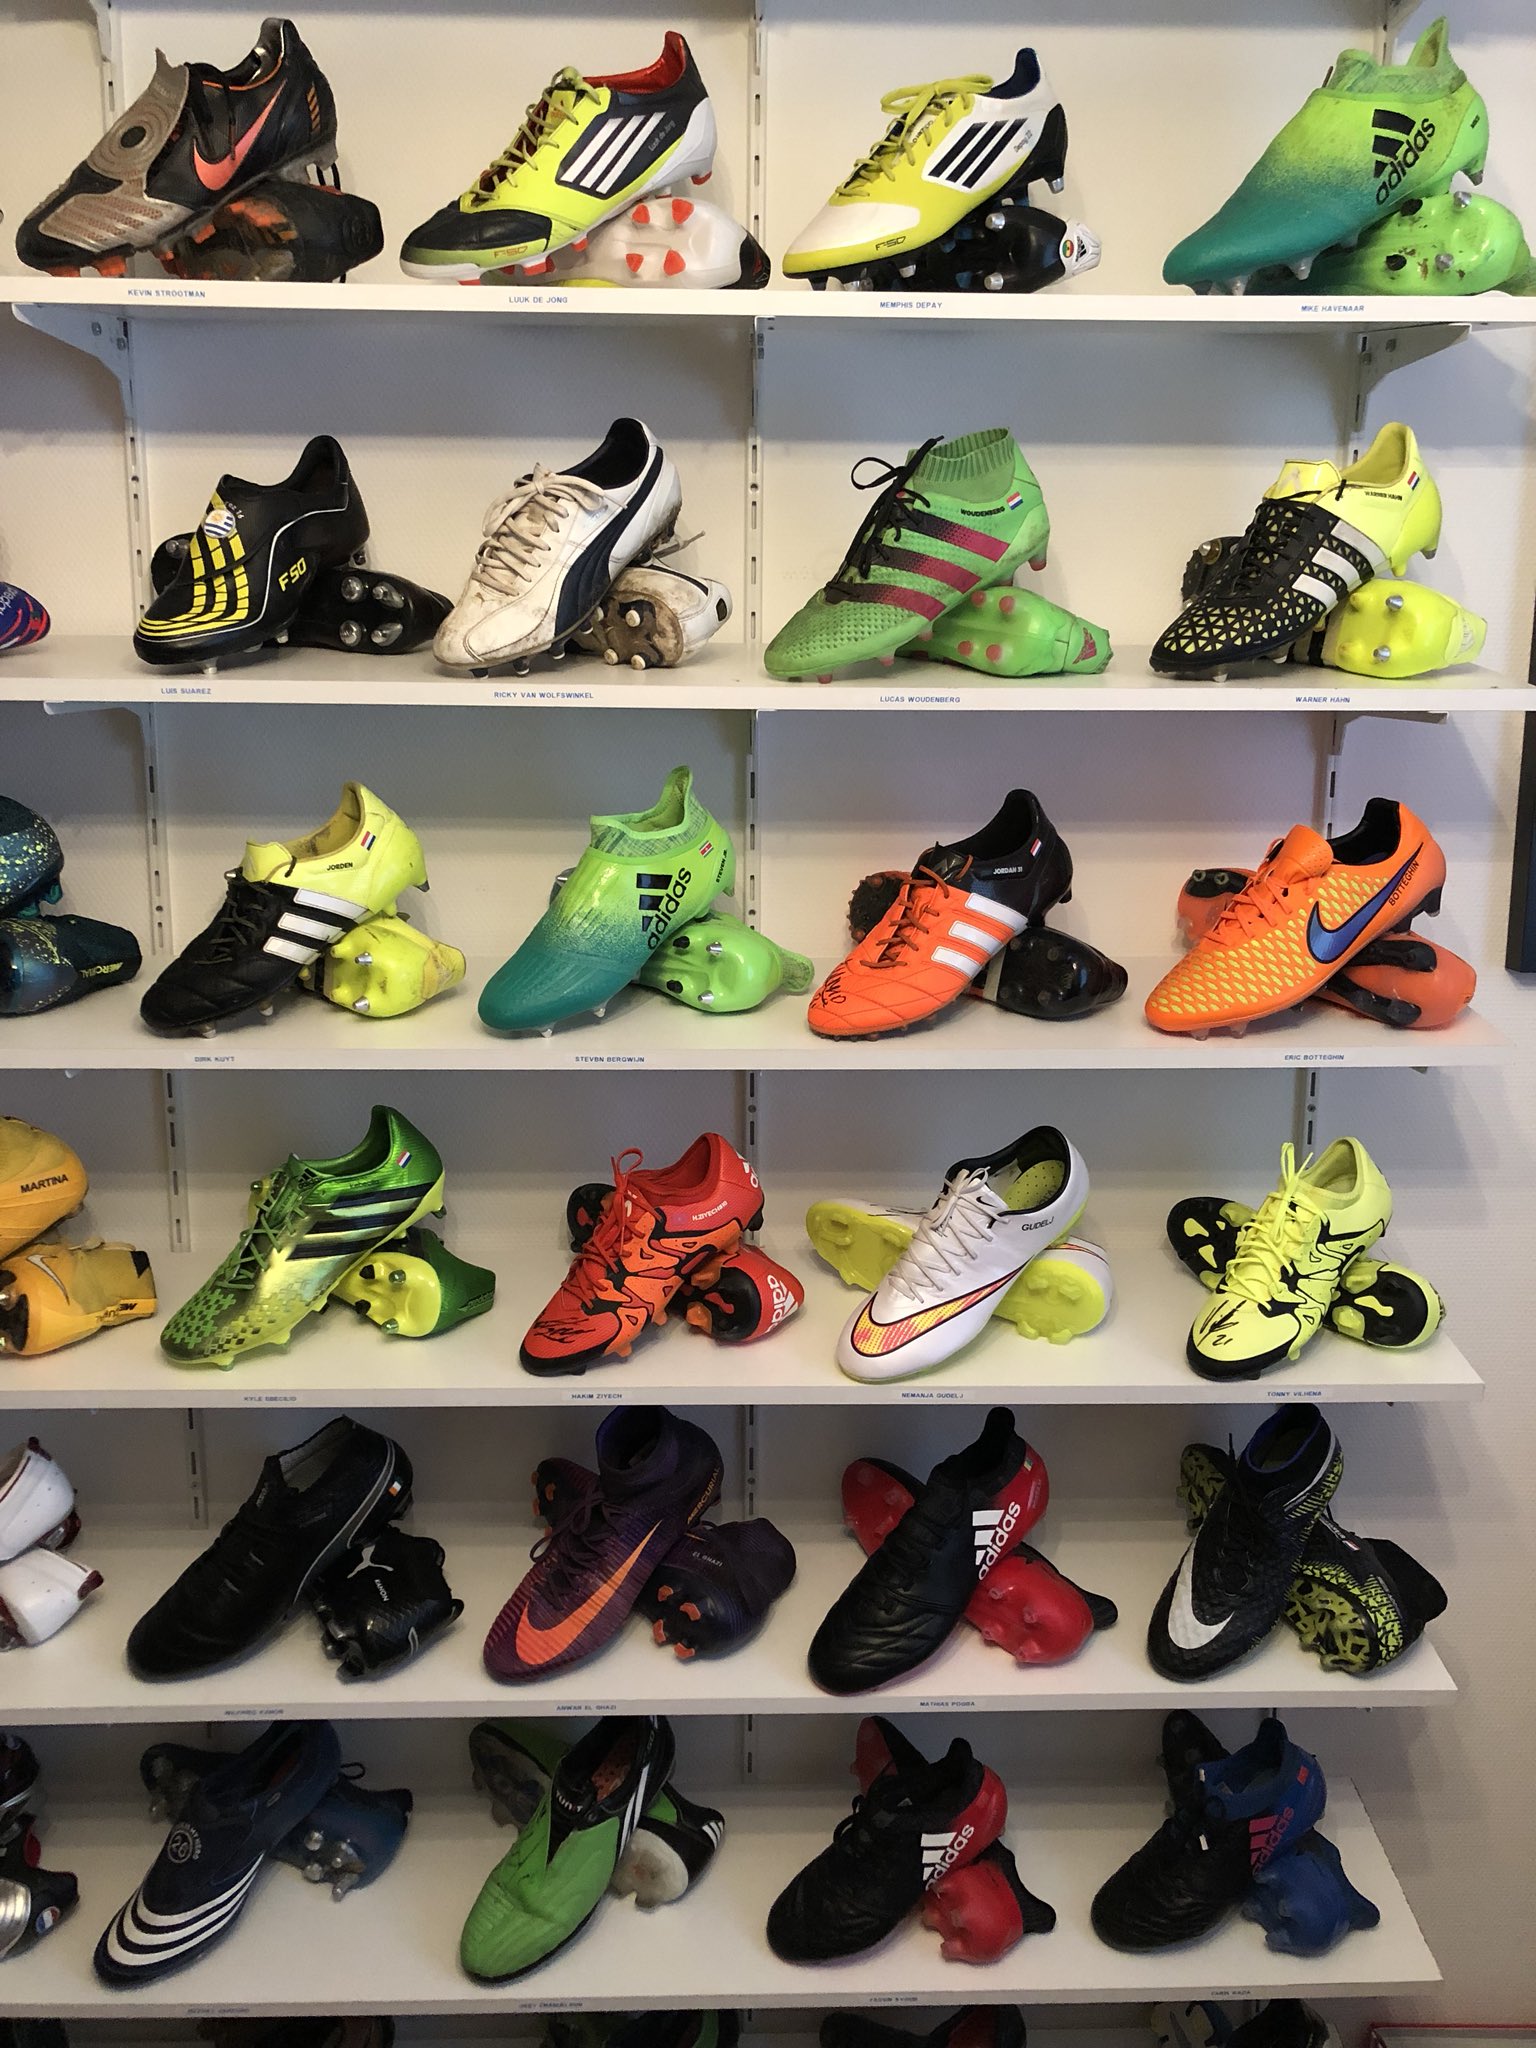 Robin van Persie on Twitter: "Which pair is your favorite and why? Best I re-tweet. 🔃 https://t.co/WSNp76rxOX" Twitter